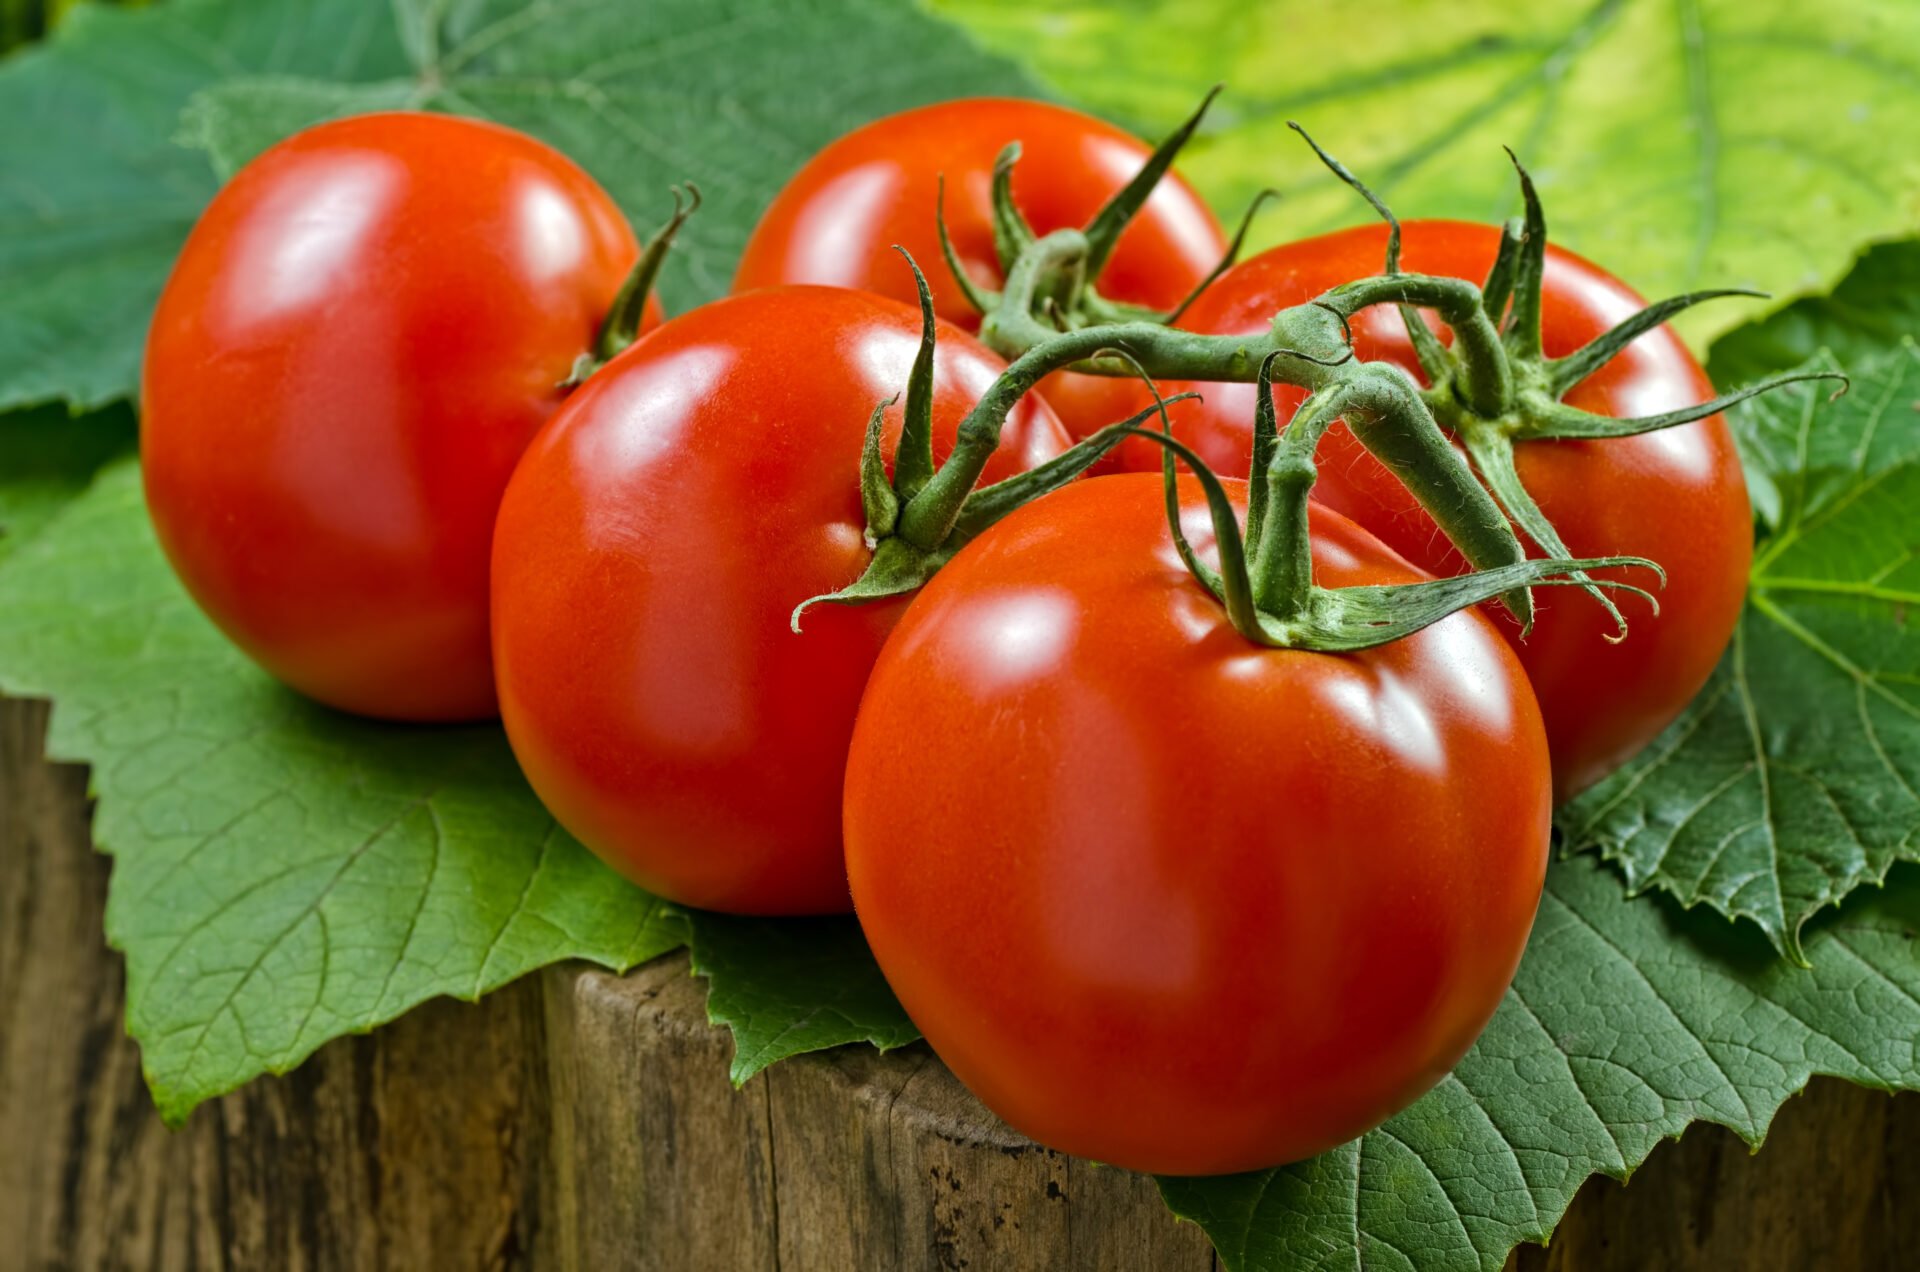 Vine ripened red tomatoes against a leafy background.